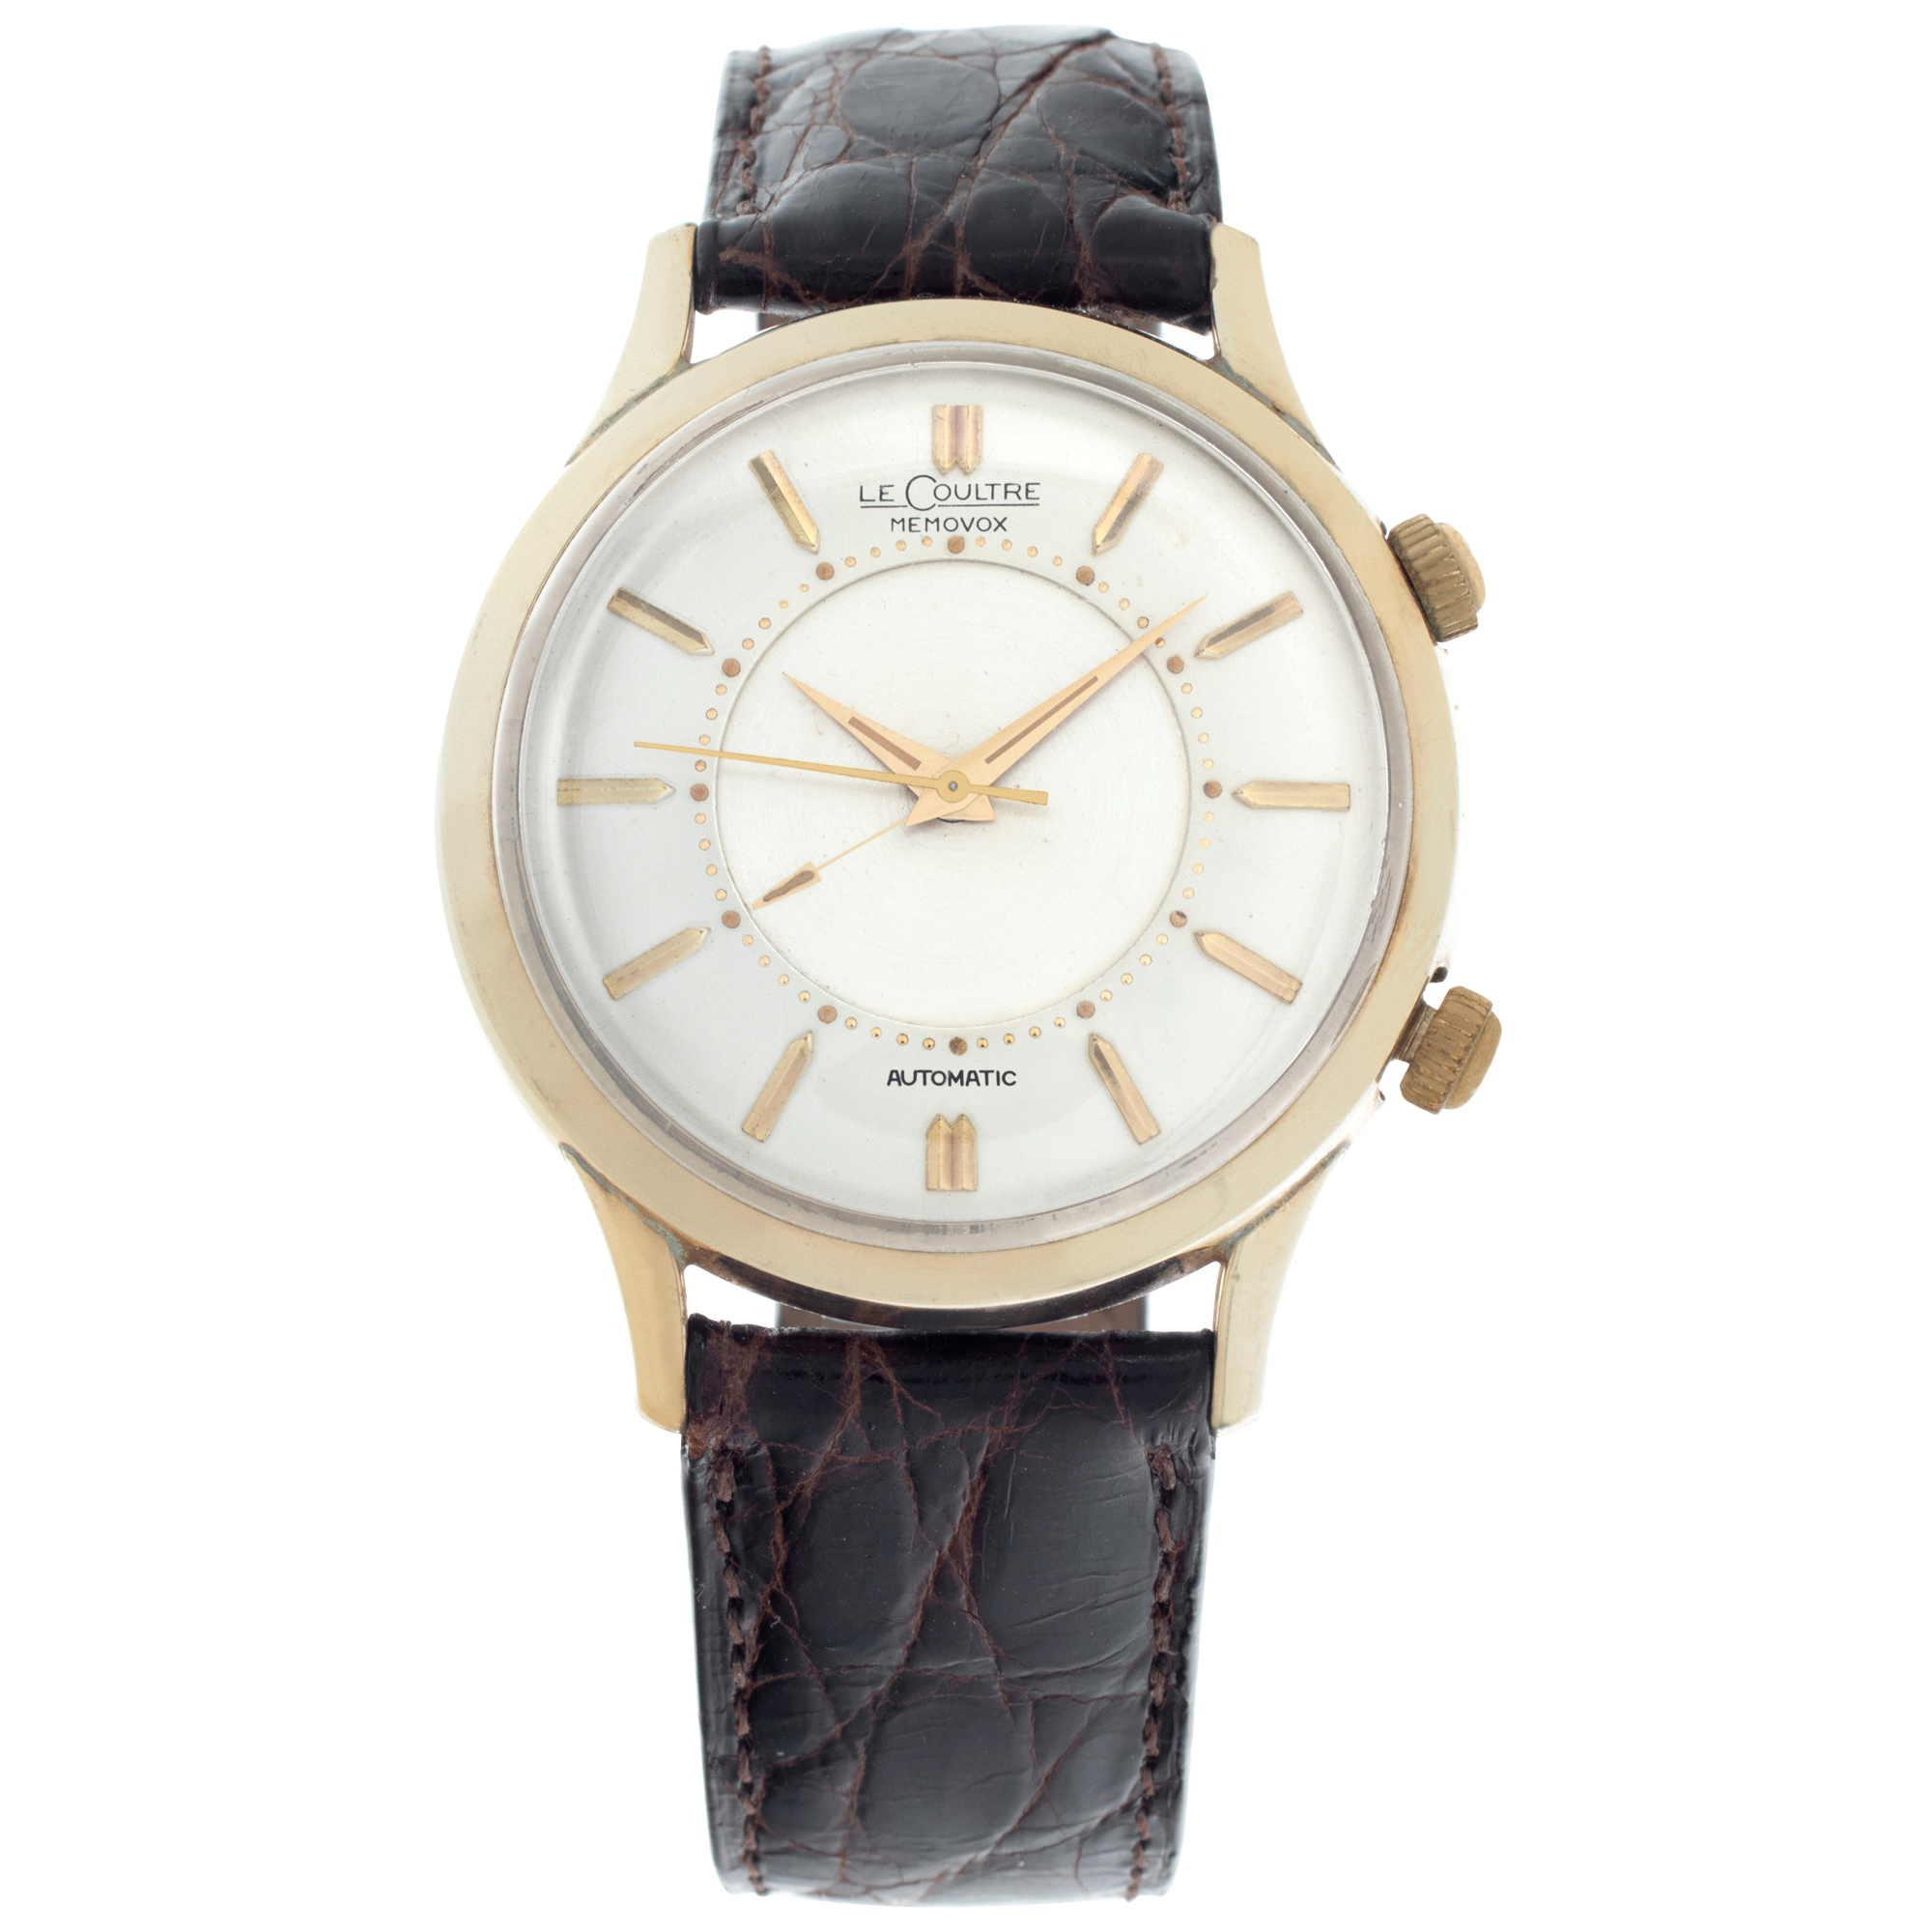 LeCoultre Memovox 38mm 2265 (Watches)